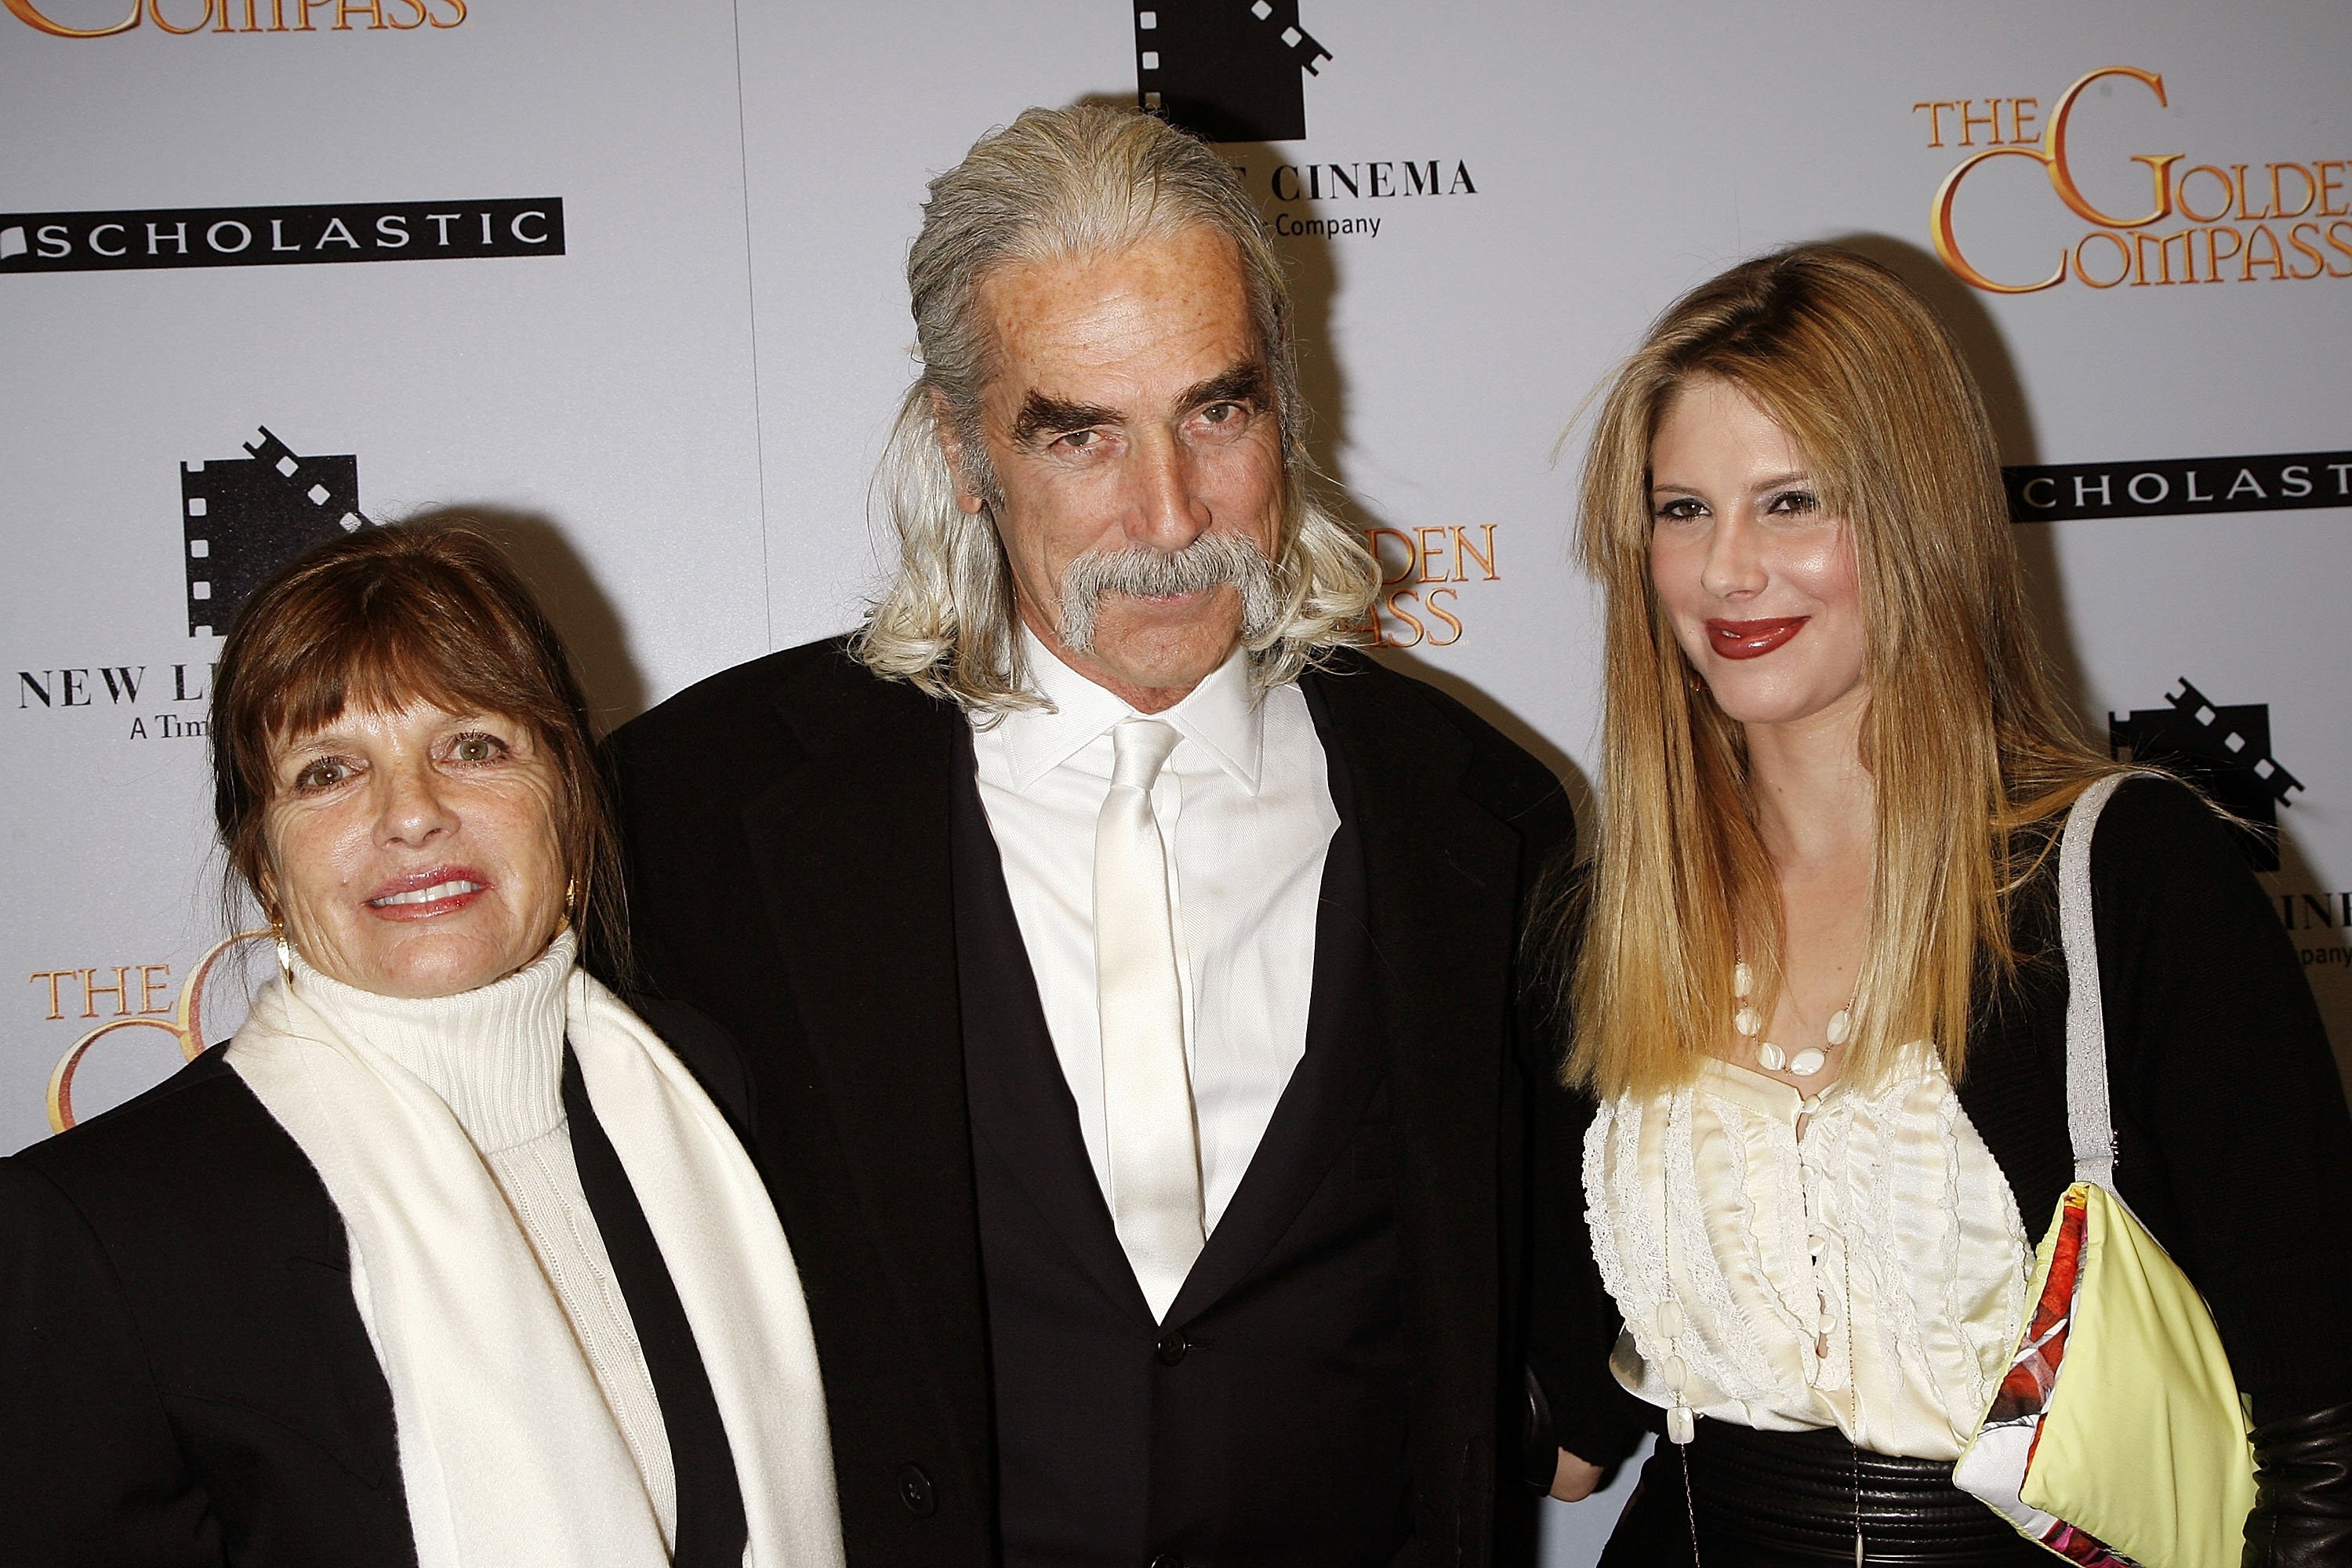 Katherine Ross, actor Sam Elliot and Cleo Rose Elliott arrive at "The Golden Compass" premiere at the Ziegfeld Theater on December 2, 2007 in New York City | Source: Getty Images